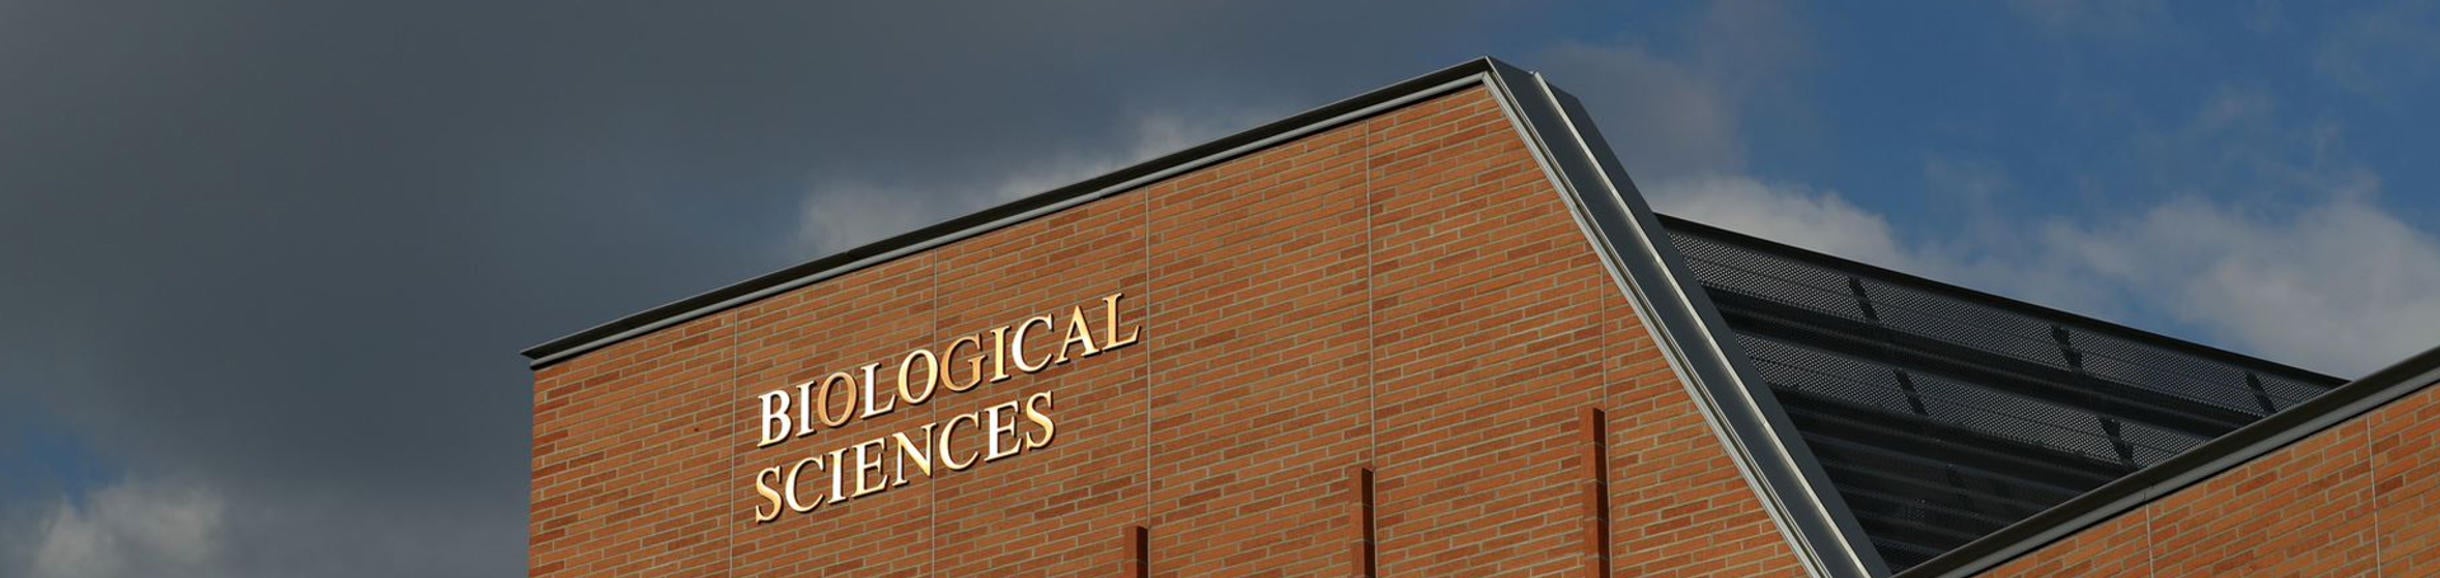 Stan Lims- Biological Science Building